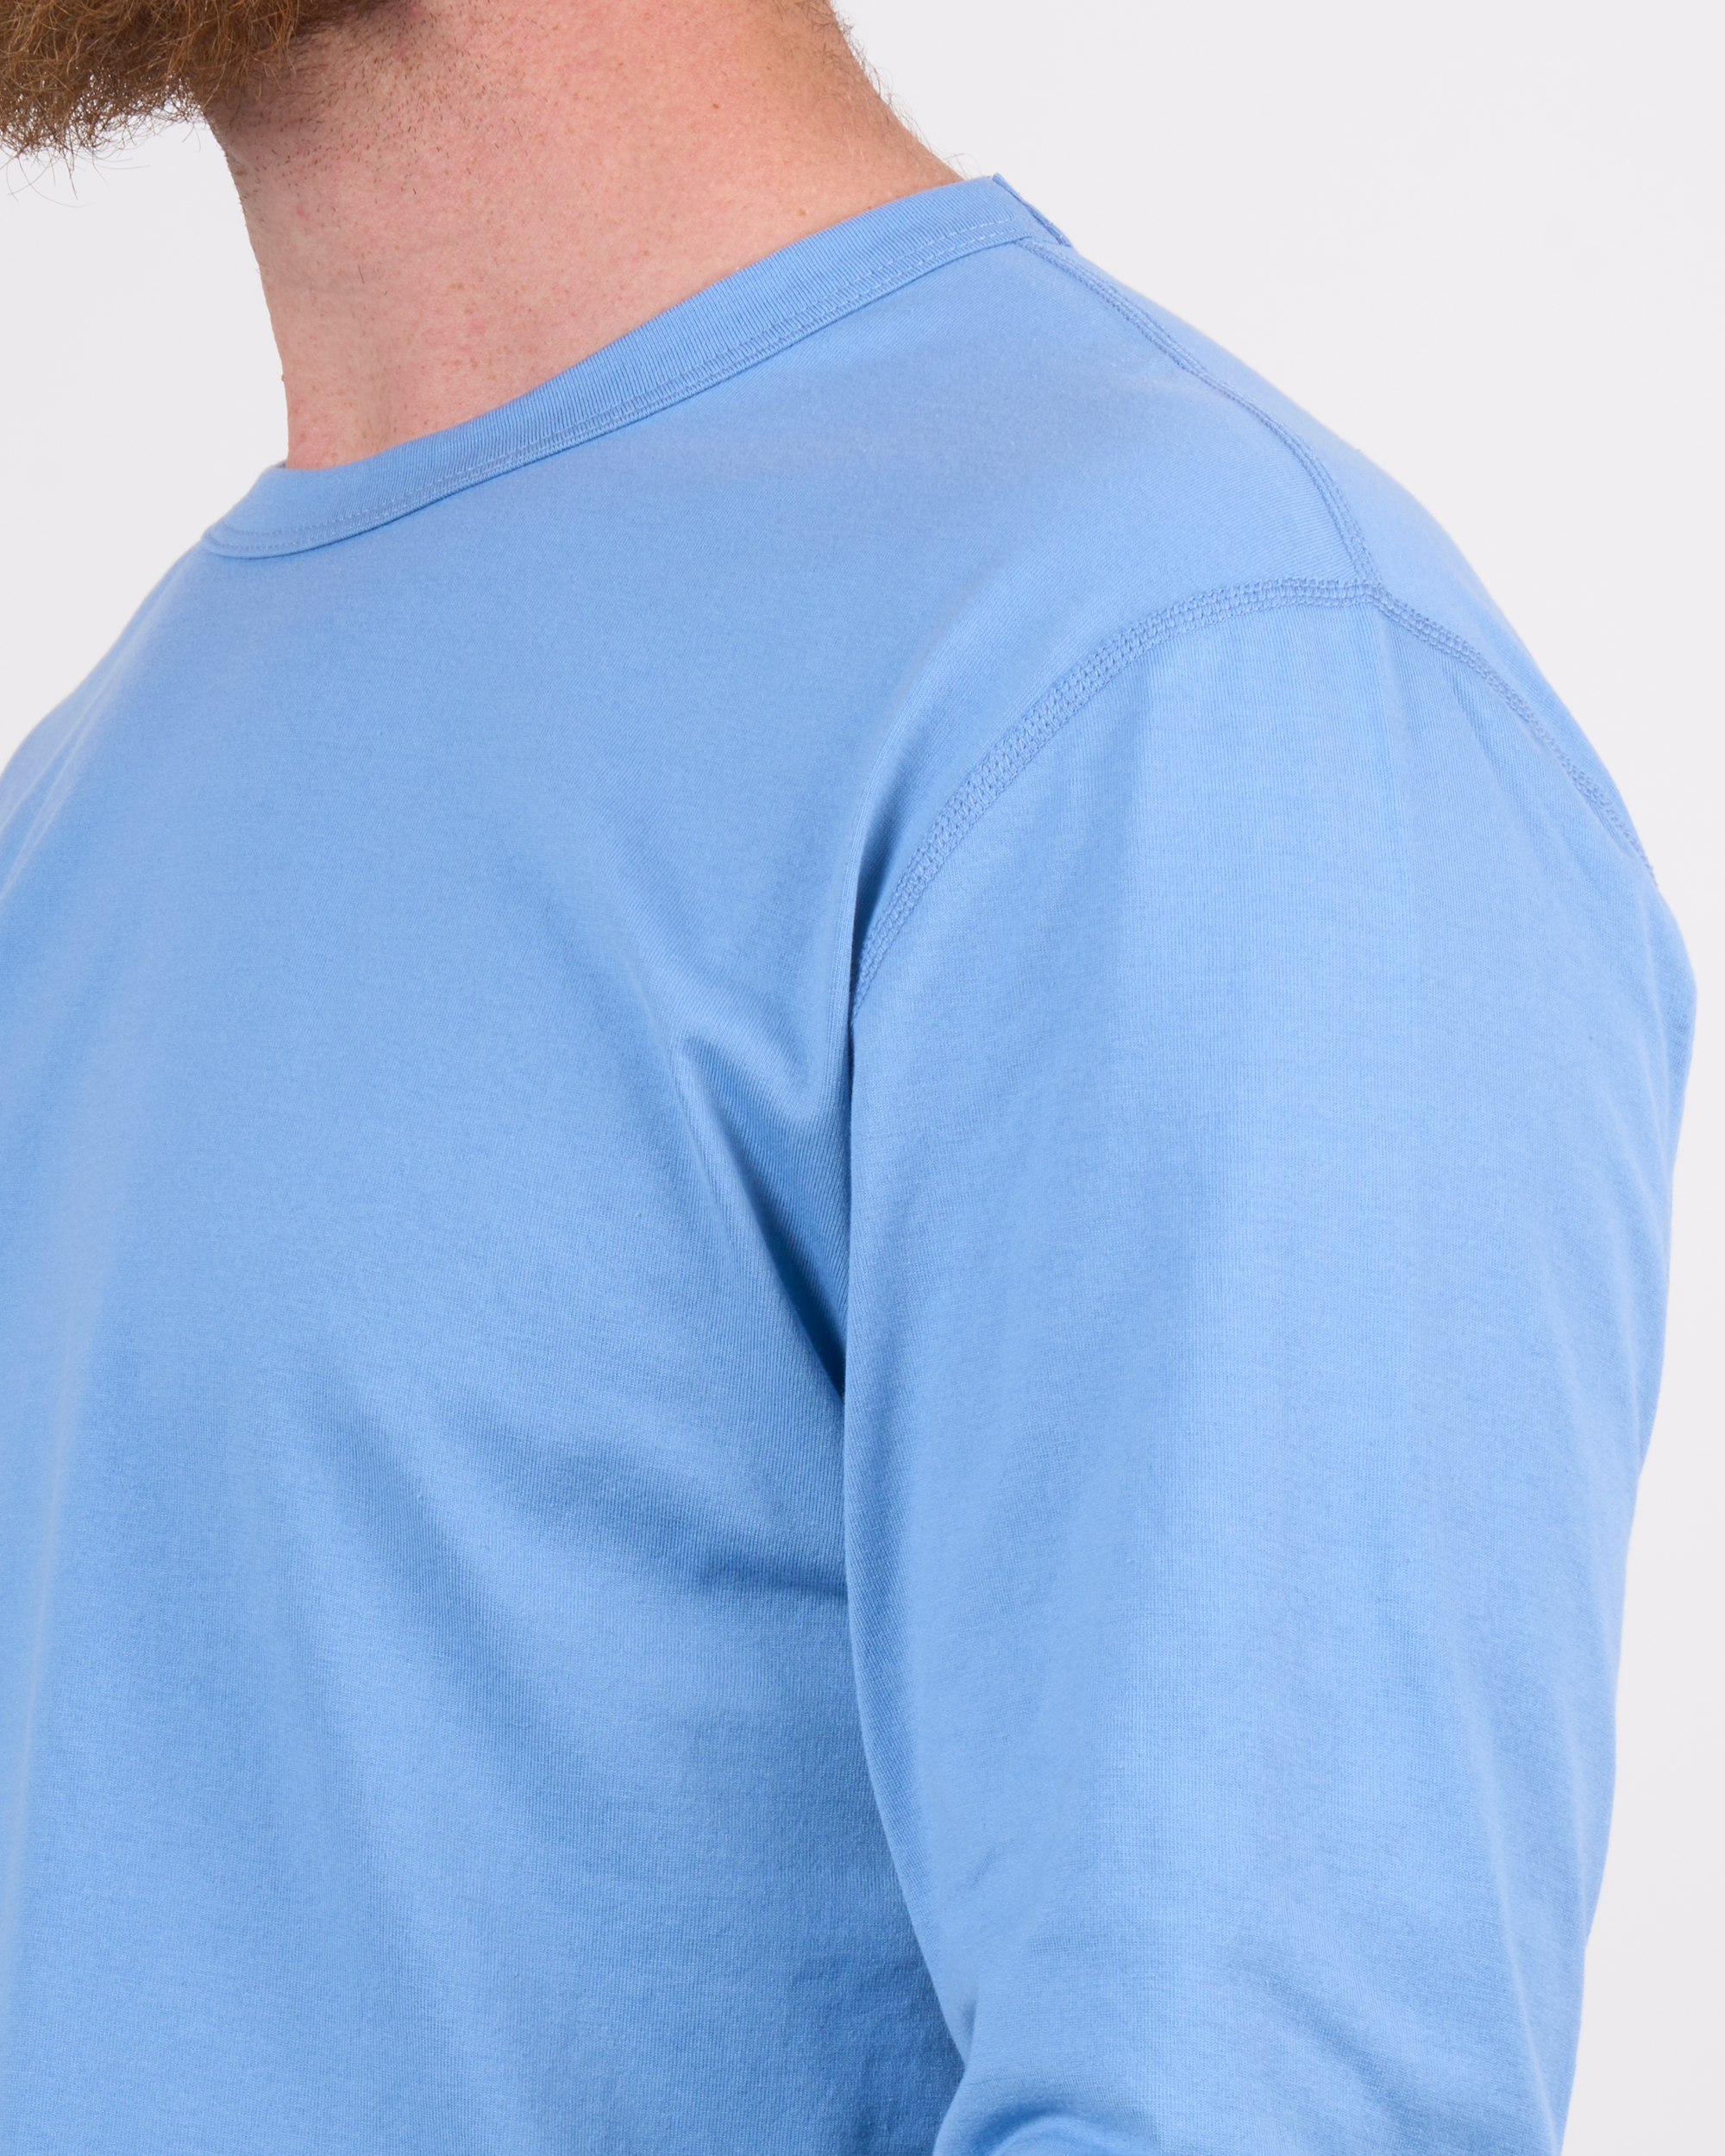 Foreign Rider Co Supima Cotton Surf Blue Long Sleeve T-Shirt Shoulder Flat-lock Stitch Detail